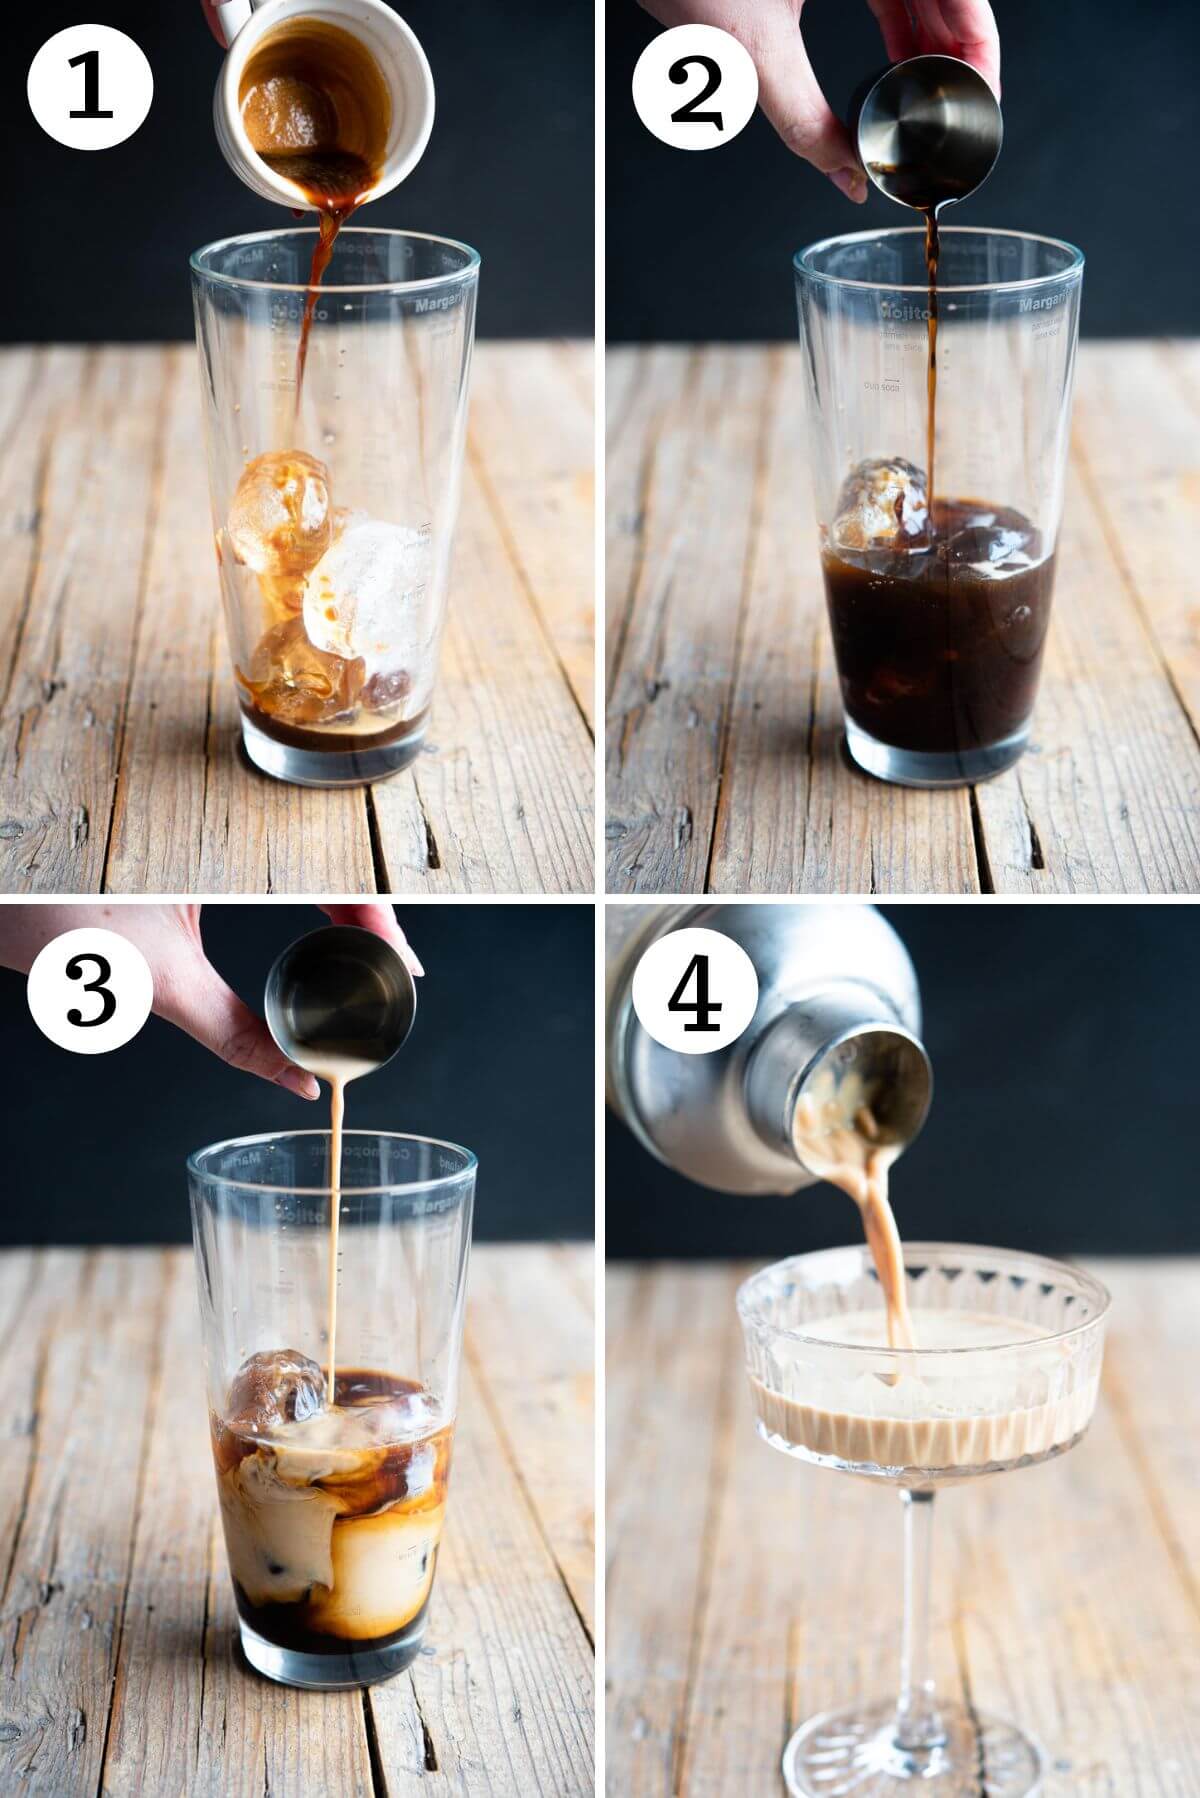 Step by step photos showing how to make a martini macchiato cocktail